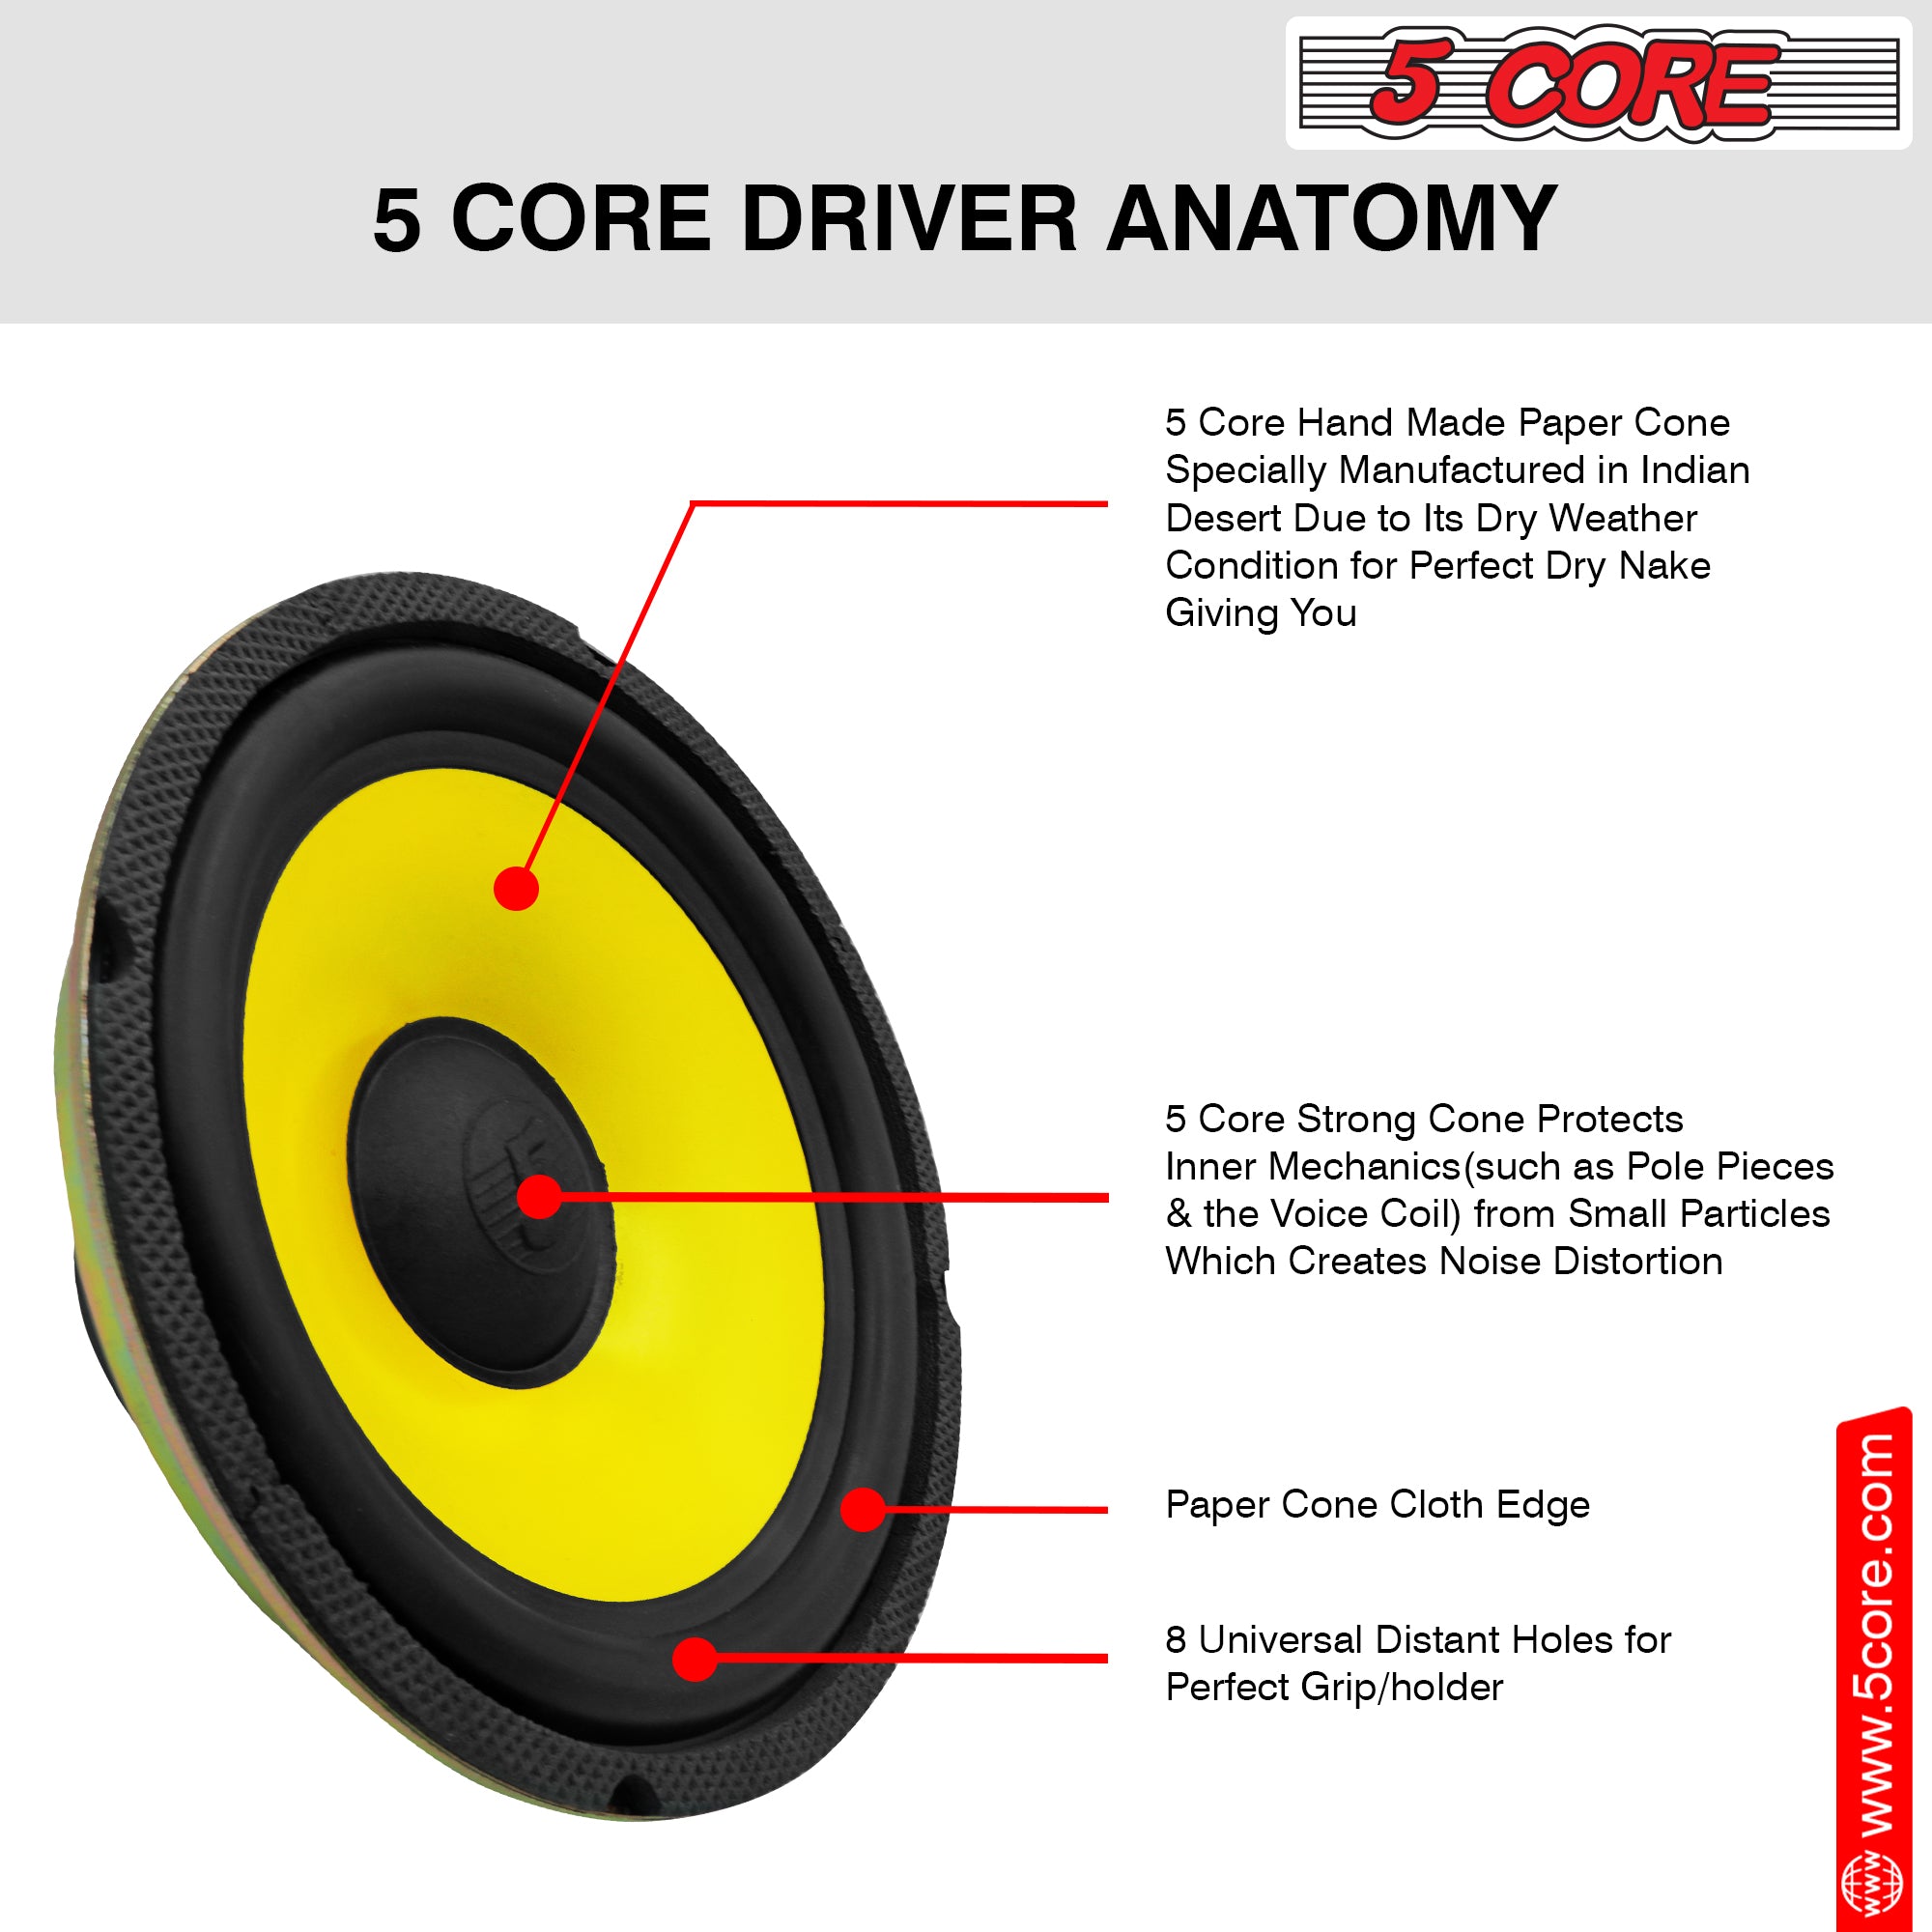 5 Core 8 Inch Subwoofer • 900W PMPO 4 Ohm Car Bass Sub Woofer • Replacement Speaker w 1" Voice Coil